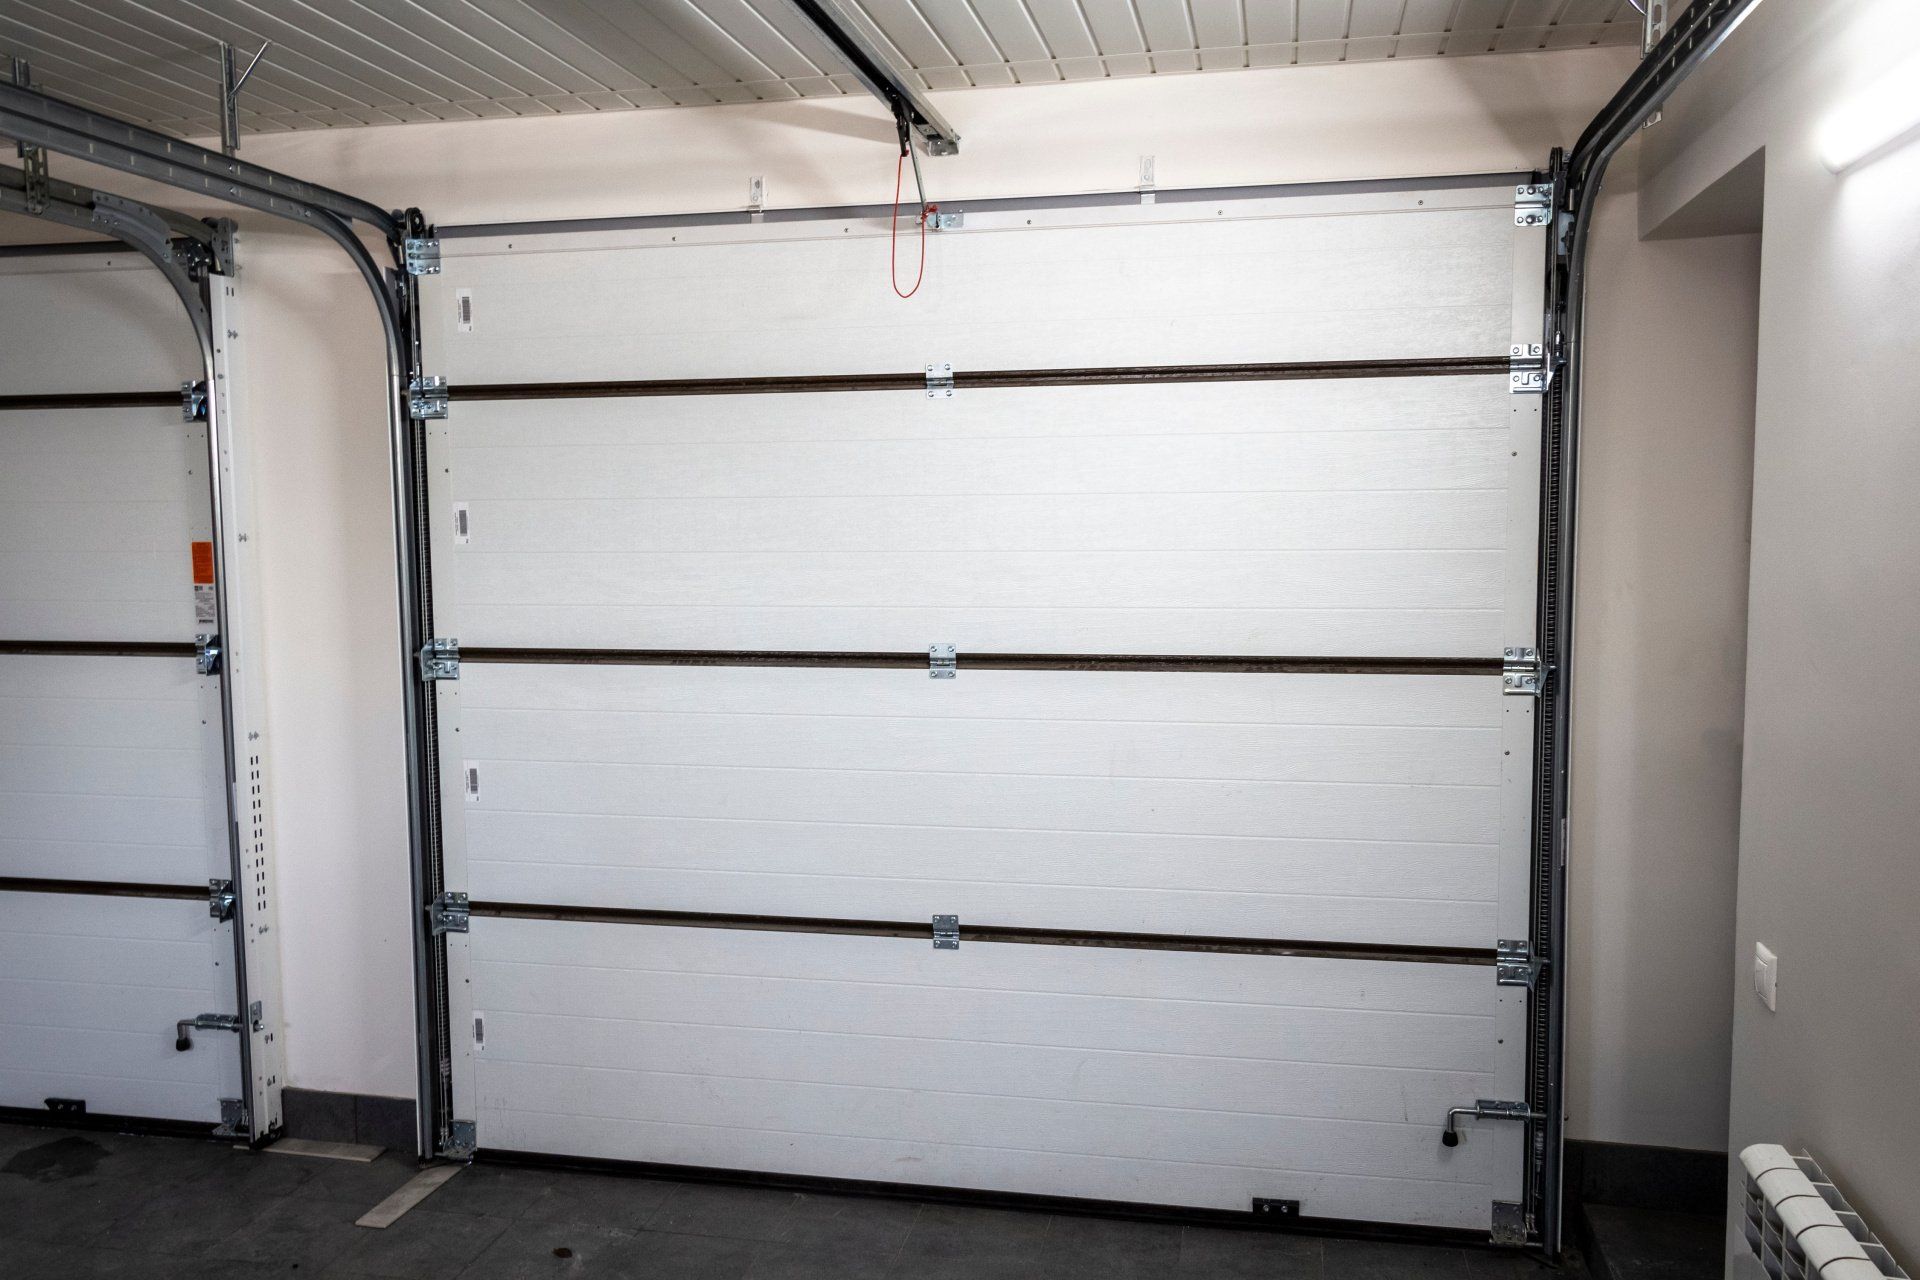 Interior of a double garage with two new white sectional garage doors